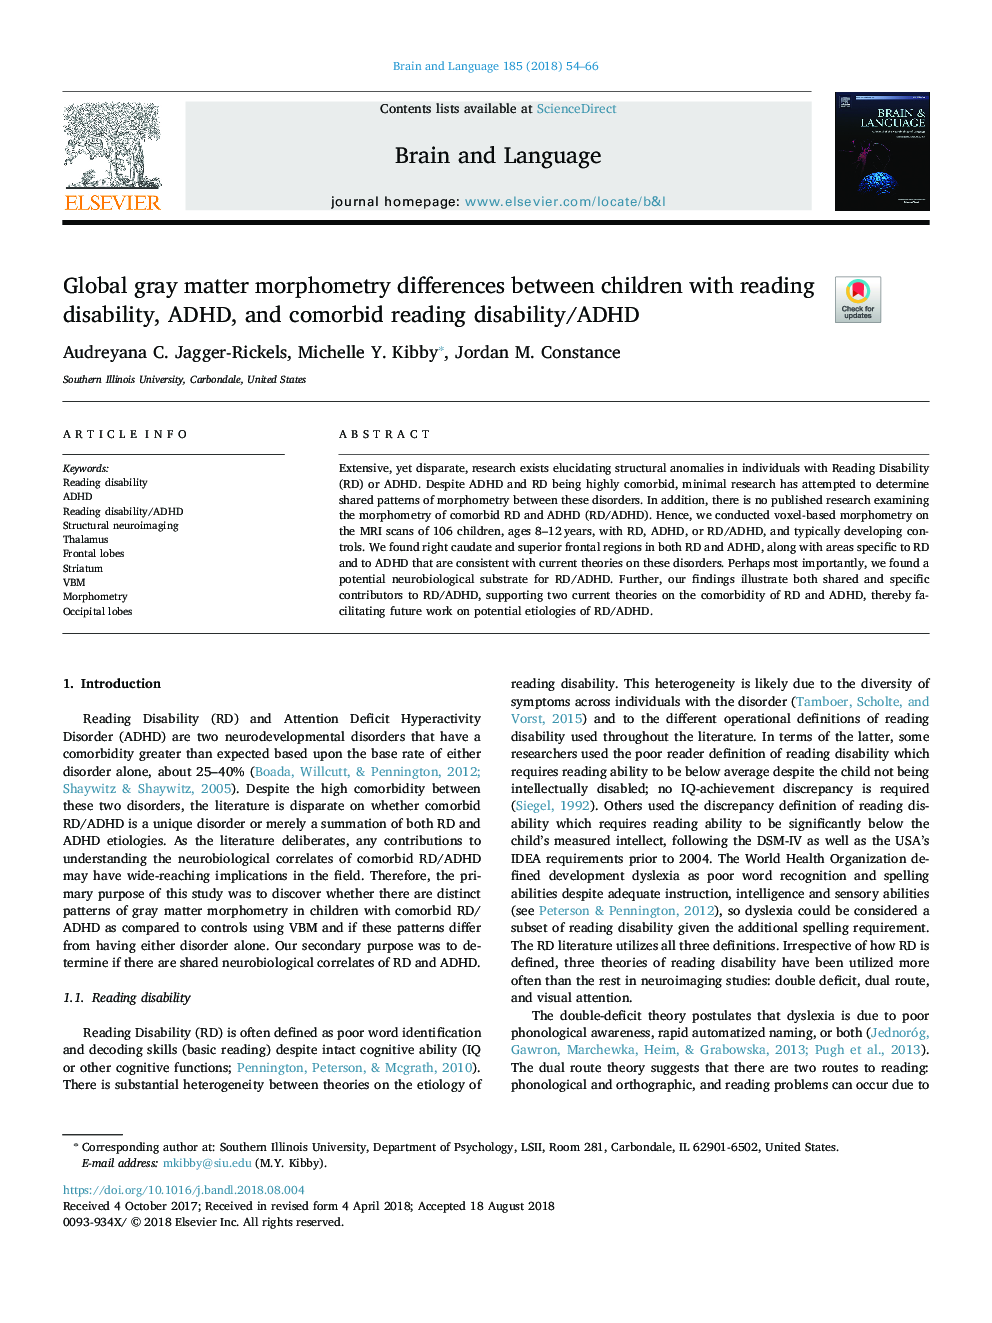 Global gray matter morphometry differences between children with reading disability, ADHD, and comorbid reading disability/ADHD